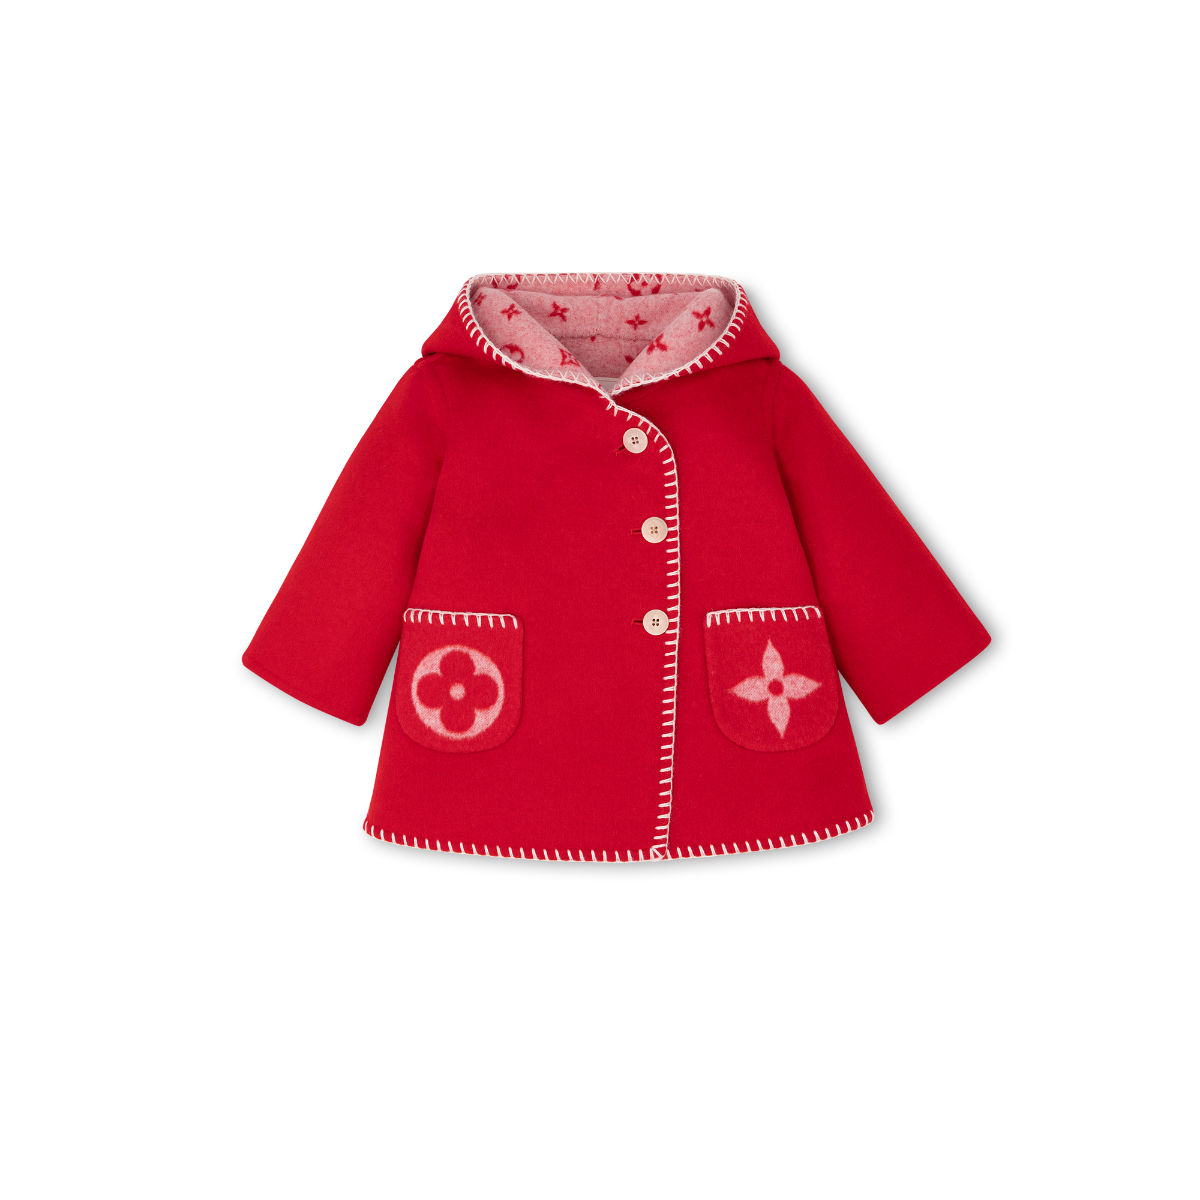 Louis Vuitton Introduces Its New Baby Winter Capsule Collection